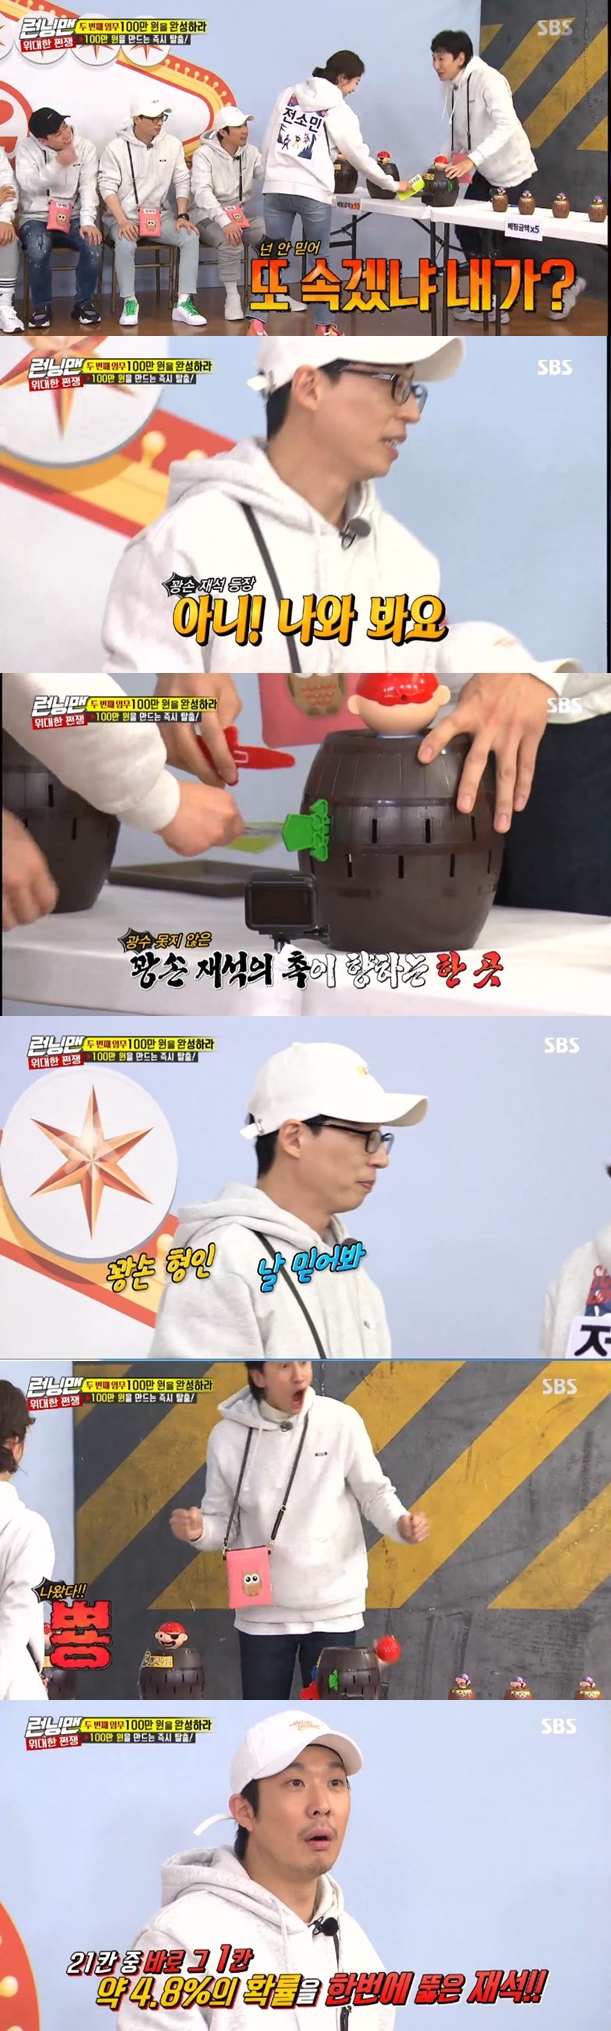 Yoo Jae-Suk proved to be a master of the kangson systemIn the SBS entertainment program Running Man broadcasted on the afternoon of the 24th, Great Heart race was held where the person with the highest amount won until the end.The members gathered in the betting room after the Top Model with the citizens received a new mission; the production team explained the mission, First, a person who collected 1 million won can escape first.Kim Jong Kook succeeded in the mission first, but he could not escape the batting room due to the interference of Haha who had the chance.Lee Kwang-soo then went for a one-shot shot and Top Model for the Uncle Tong game, which has a high batting rate.But Uncle Tong did not pop out until one last knife was left, so Lee Kwang-soo was nervous and sought help from Yoo Jae-Suk.Yoo Jae-Suk promised to get the remaining money and pointed to Lee Kwang-soo for a spot.With 24 spaces remaining, Lee Kwang-soo stuck the knife in the spot Yoo Jae-Suk pointed out, without expecting it.As soon as Lee Kwang-soo put the knife in, Uncle Tong bounced up, and Lee Kwang-soo was able to escape the batting room.But Lee Kwang-soo laughed when he ran away without giving the money he had supposed to give to Yoo Jae-Suk.